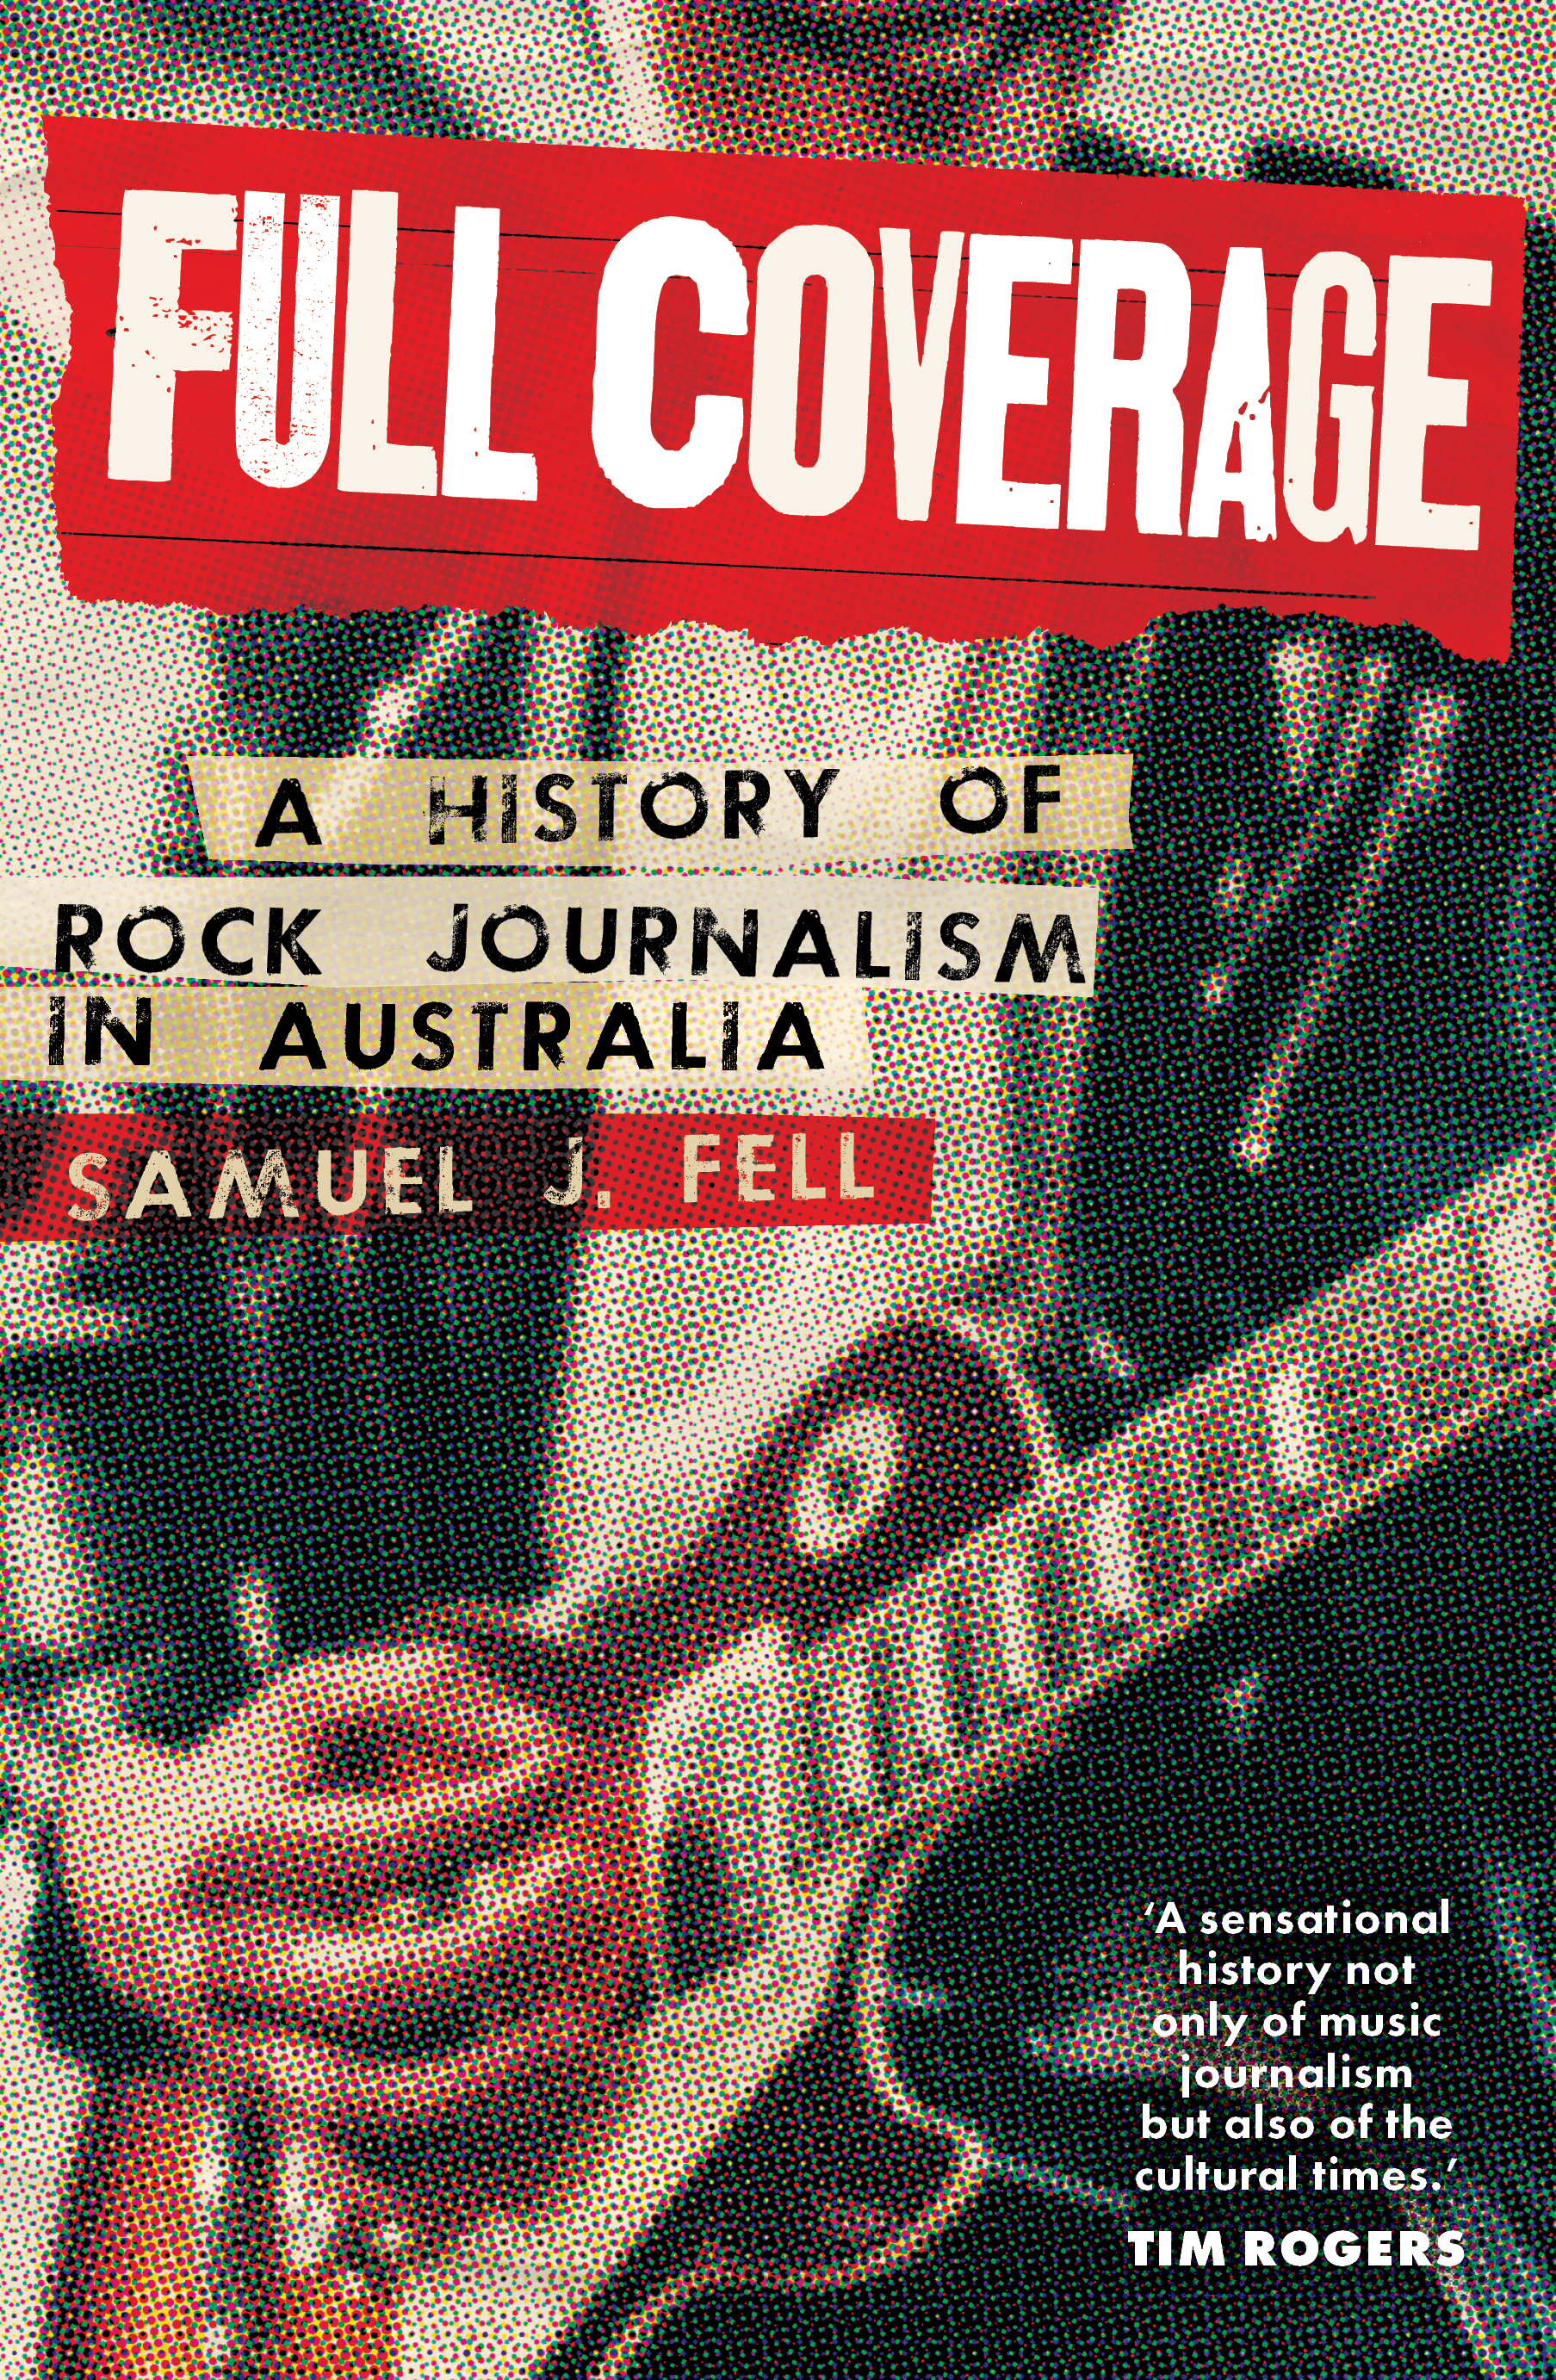 Full Coverage: A history of rock journalism in Australia